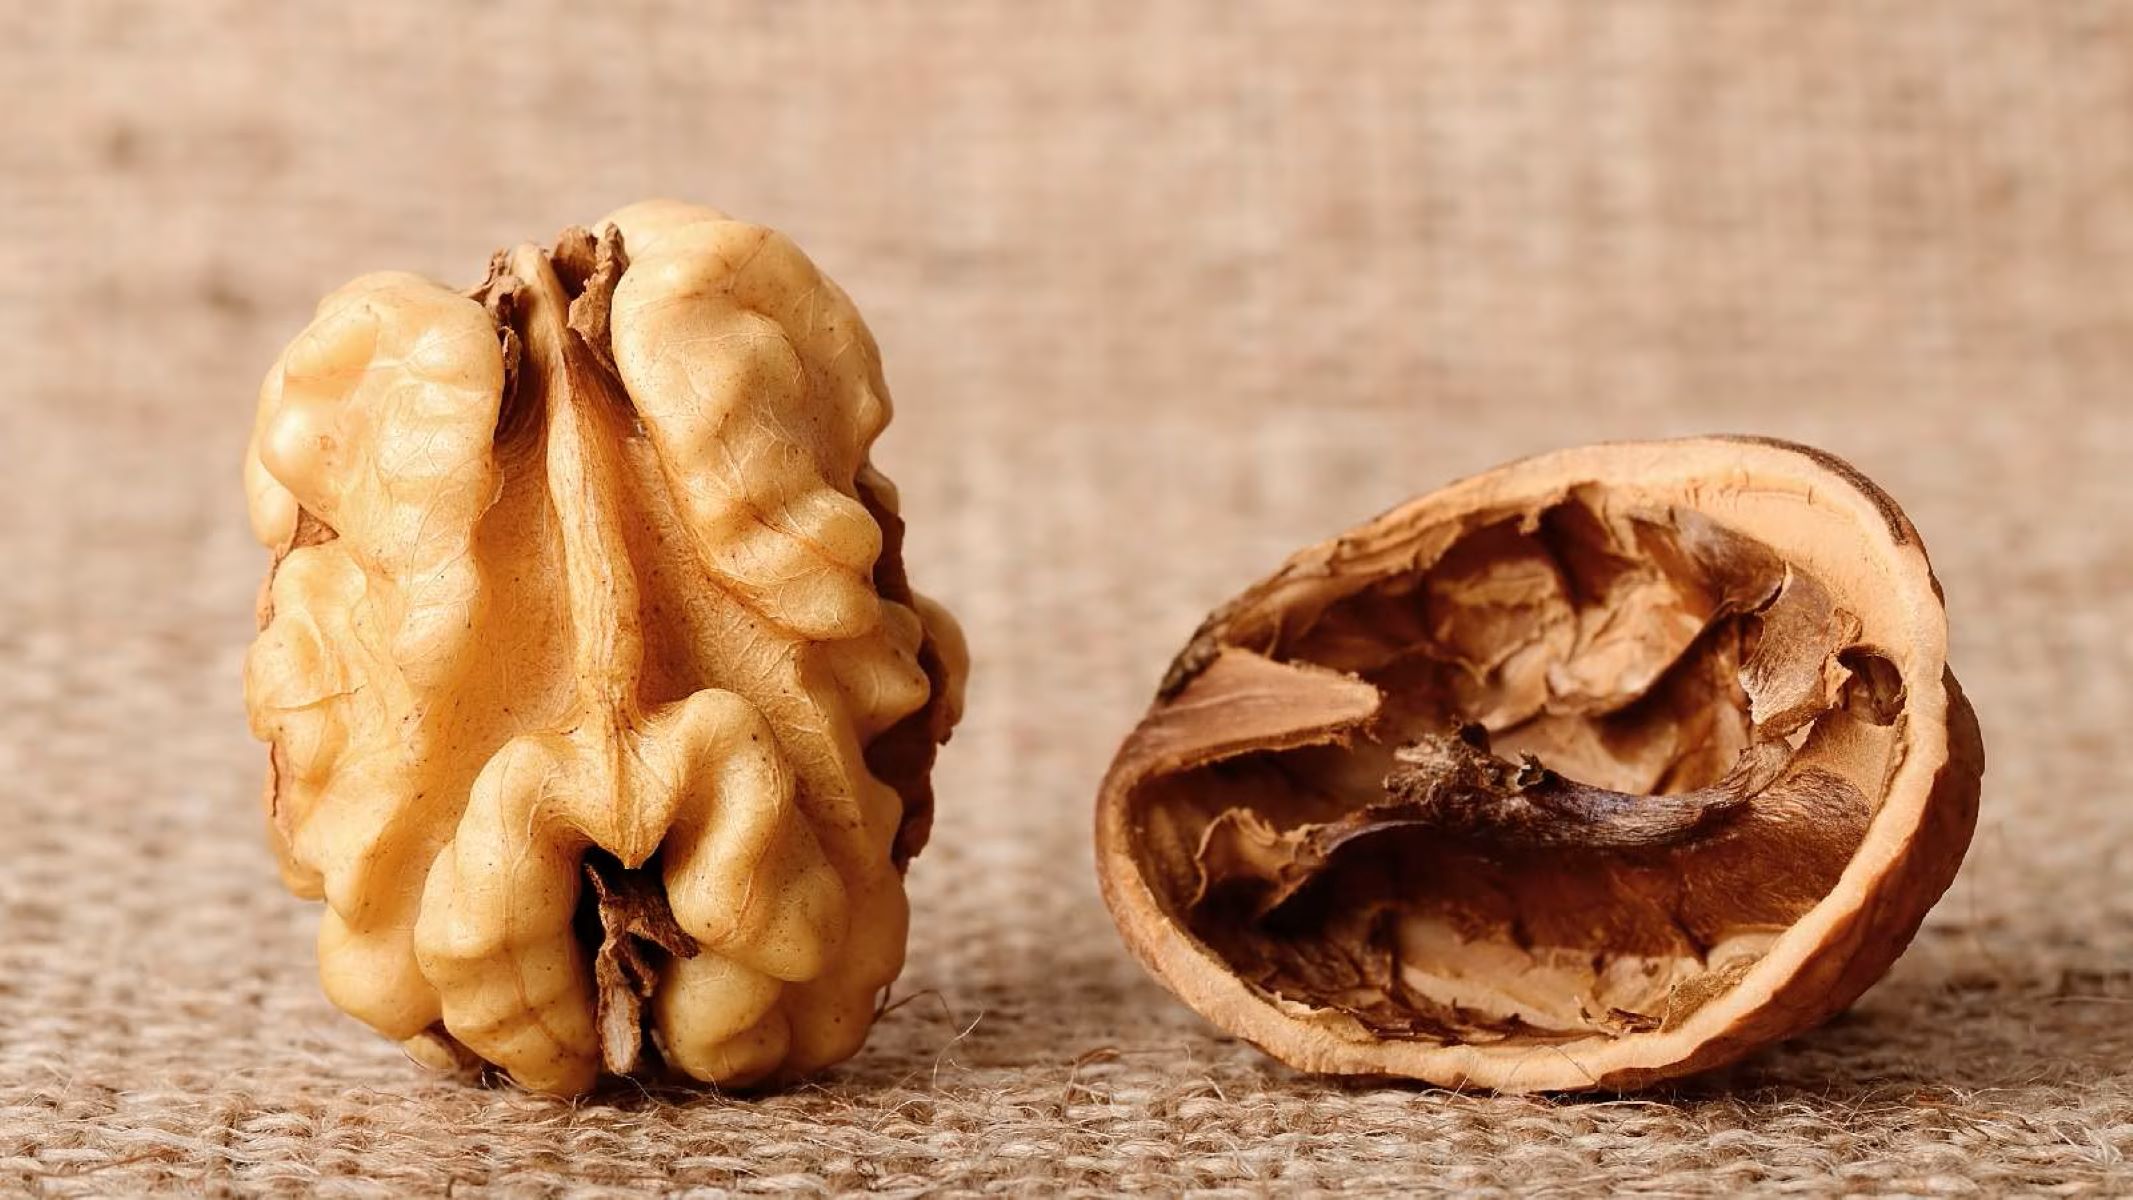 How To Store Walnuts After Opening